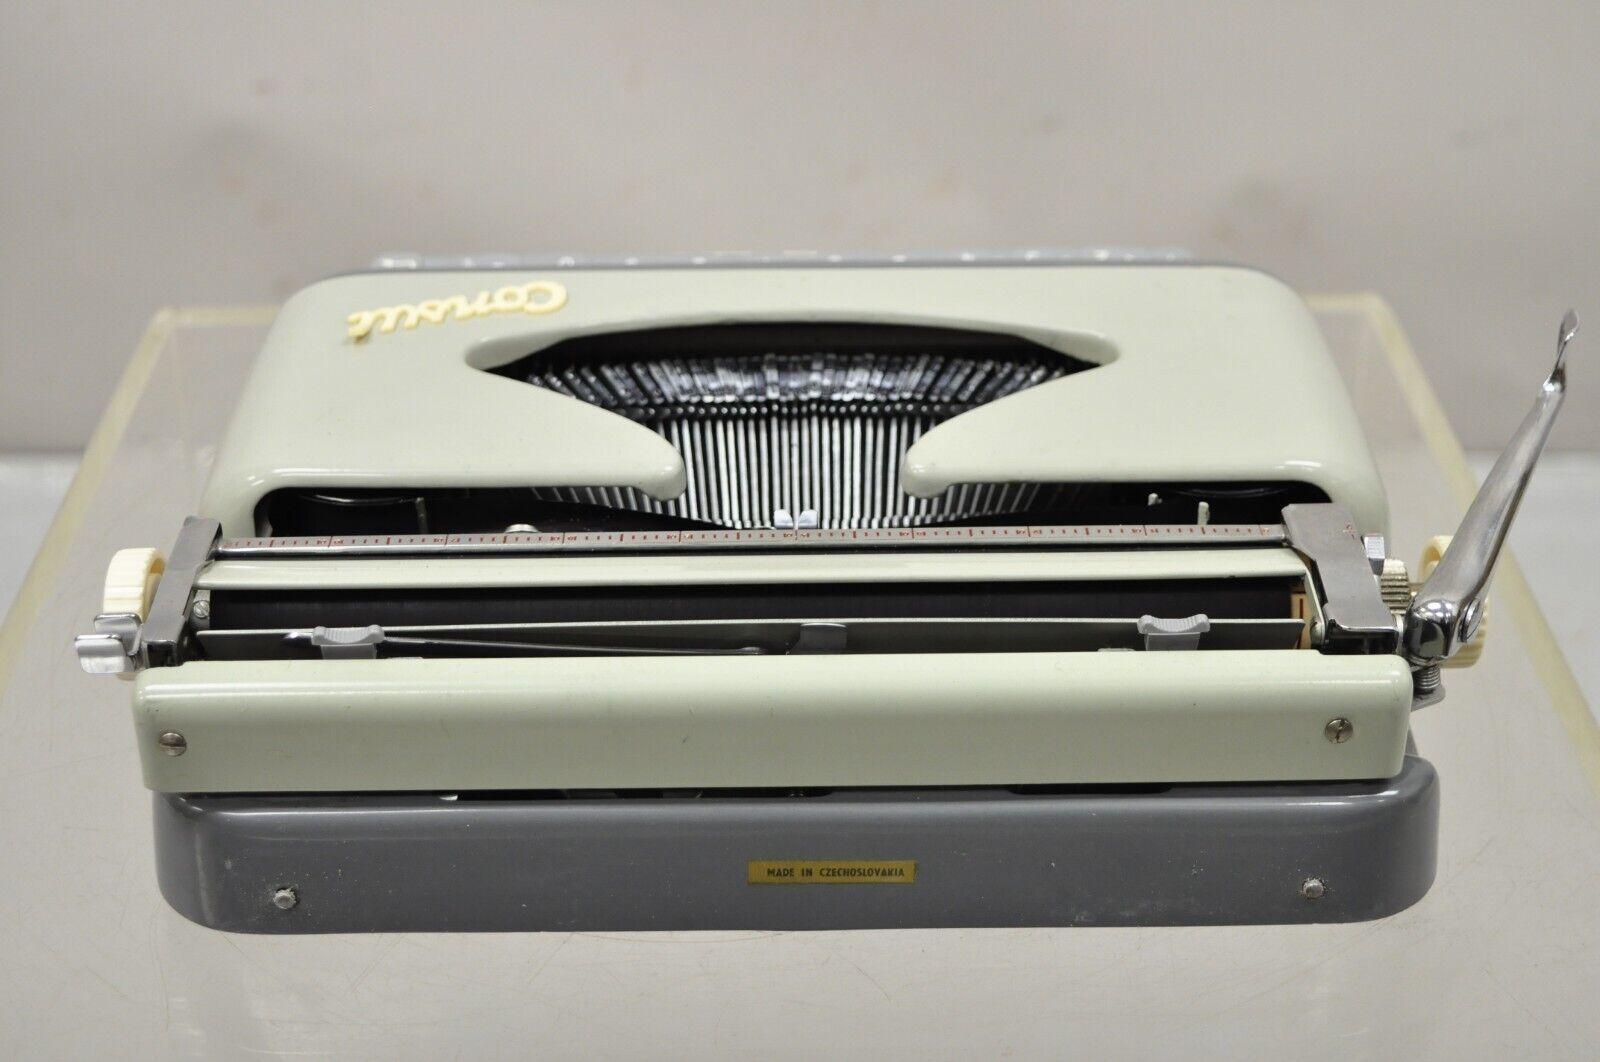 Vintage 1965 Consul 232 Portable Typewriter in two-tone slate/sky grey in Case For Sale 2